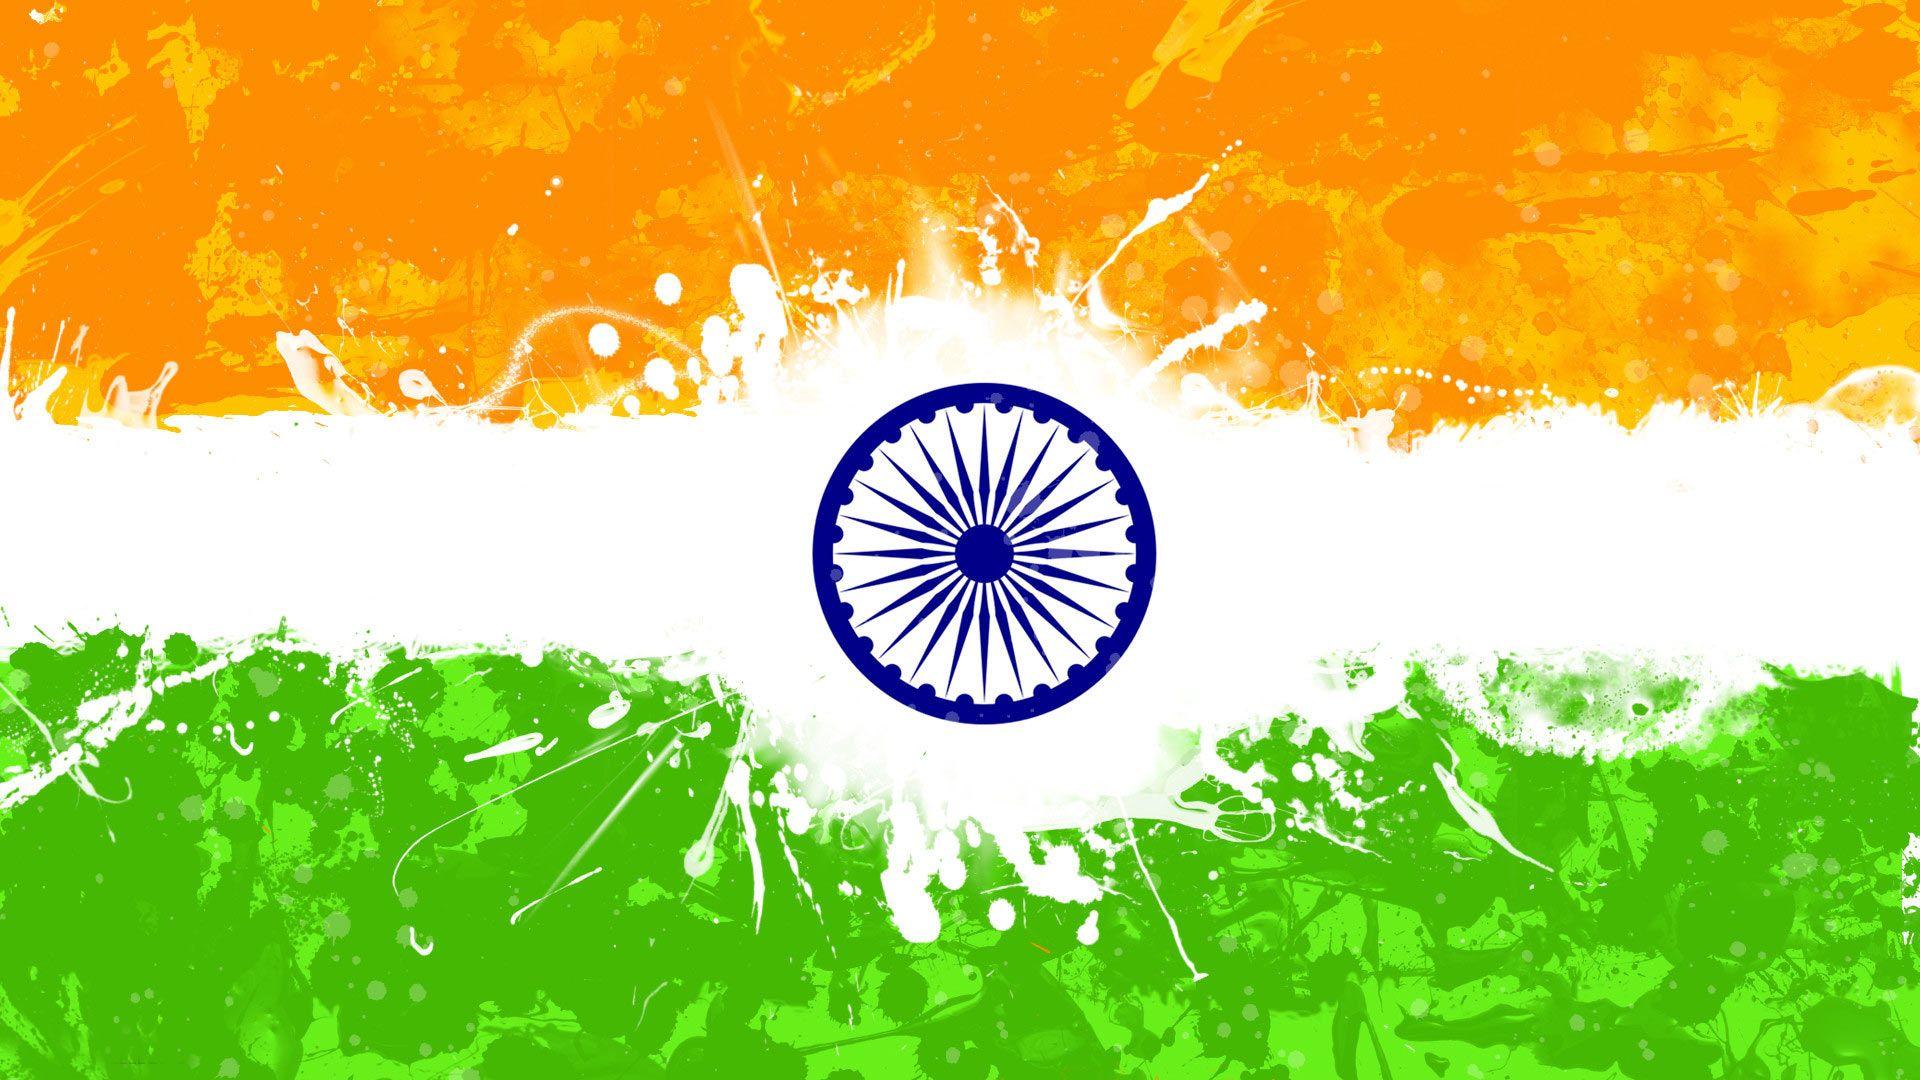 Tiranga Design For Hindi Day Background Wallpaper Image For Free Download -  Pngtree